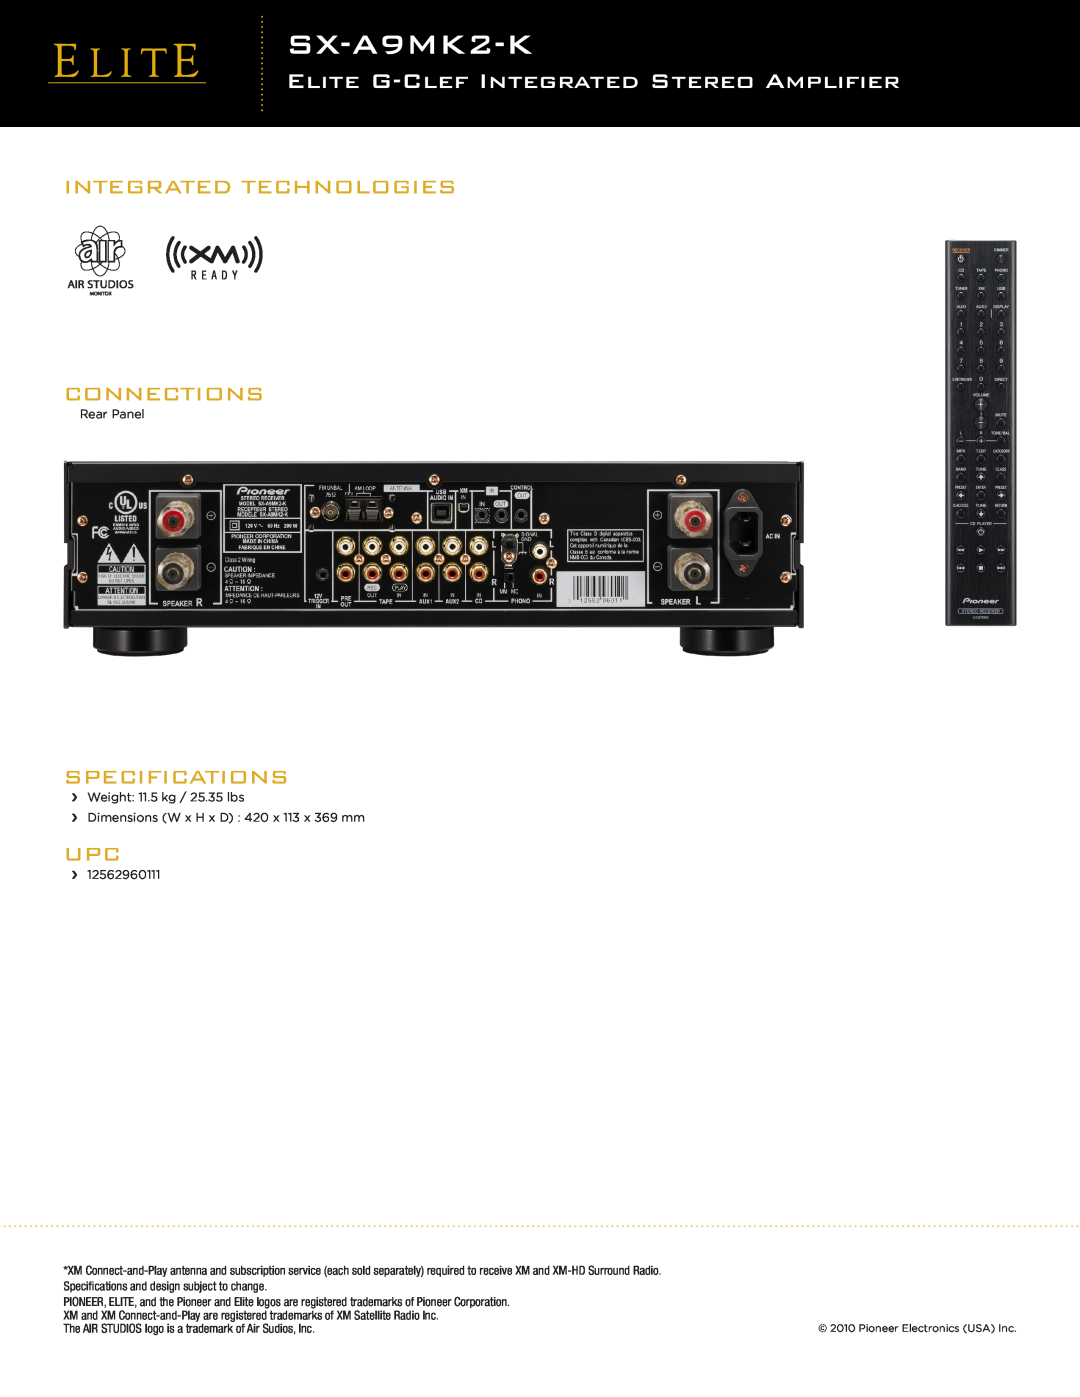 Pioneer SX-A9MK2-K manual Integrated Technologies Connections, Specifications, Elite G-Clefintegrated Stereo Amplifier 